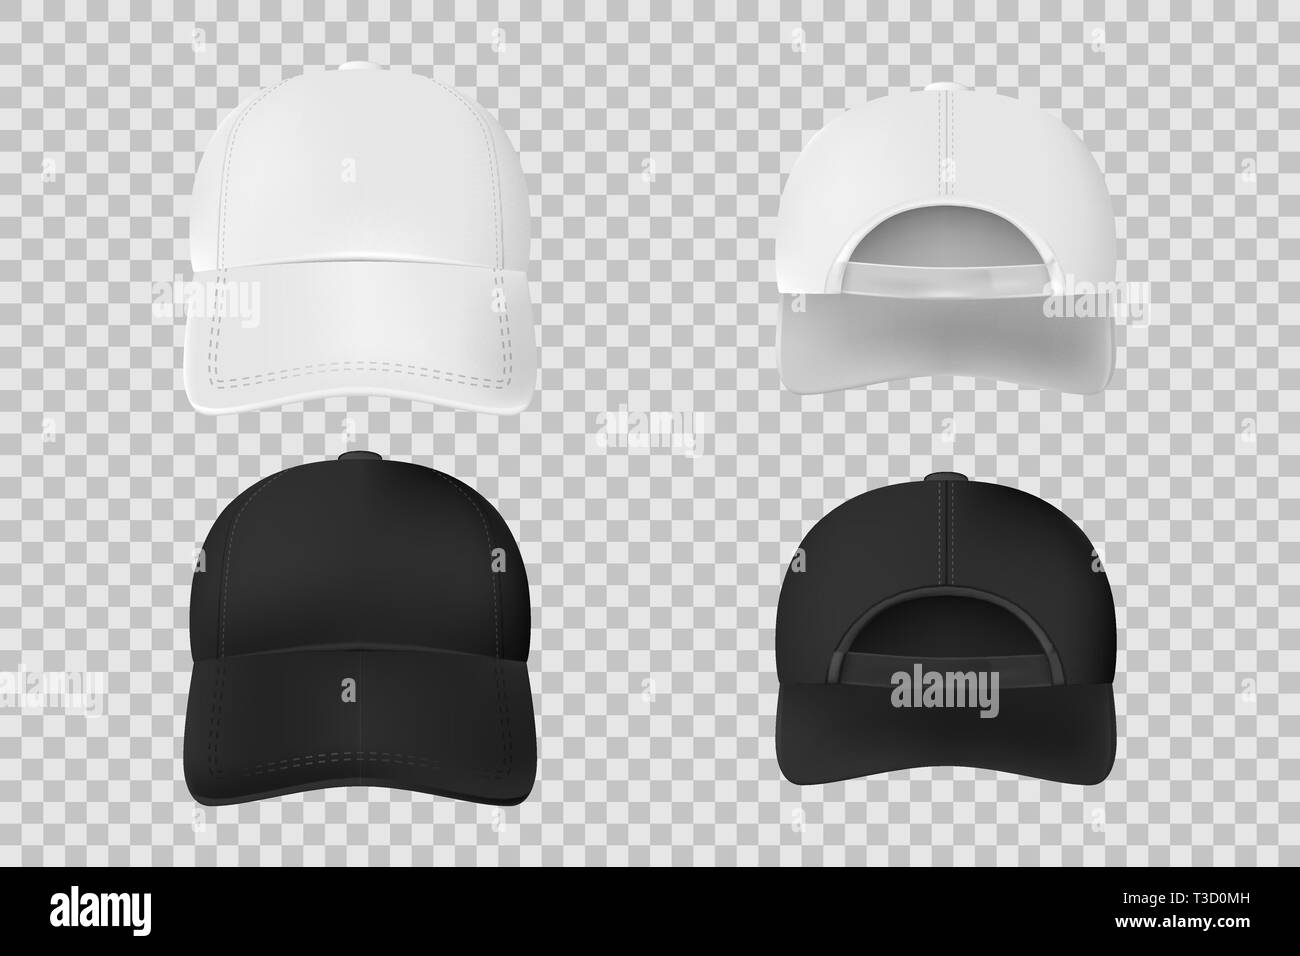 Download Set Of Baseball Cap Black And White Mockup Realistic Cap Template Front And Back Vie Isolated On Transparent Background Vector Illustration Stock Vector Image Art Alamy PSD Mockup Templates